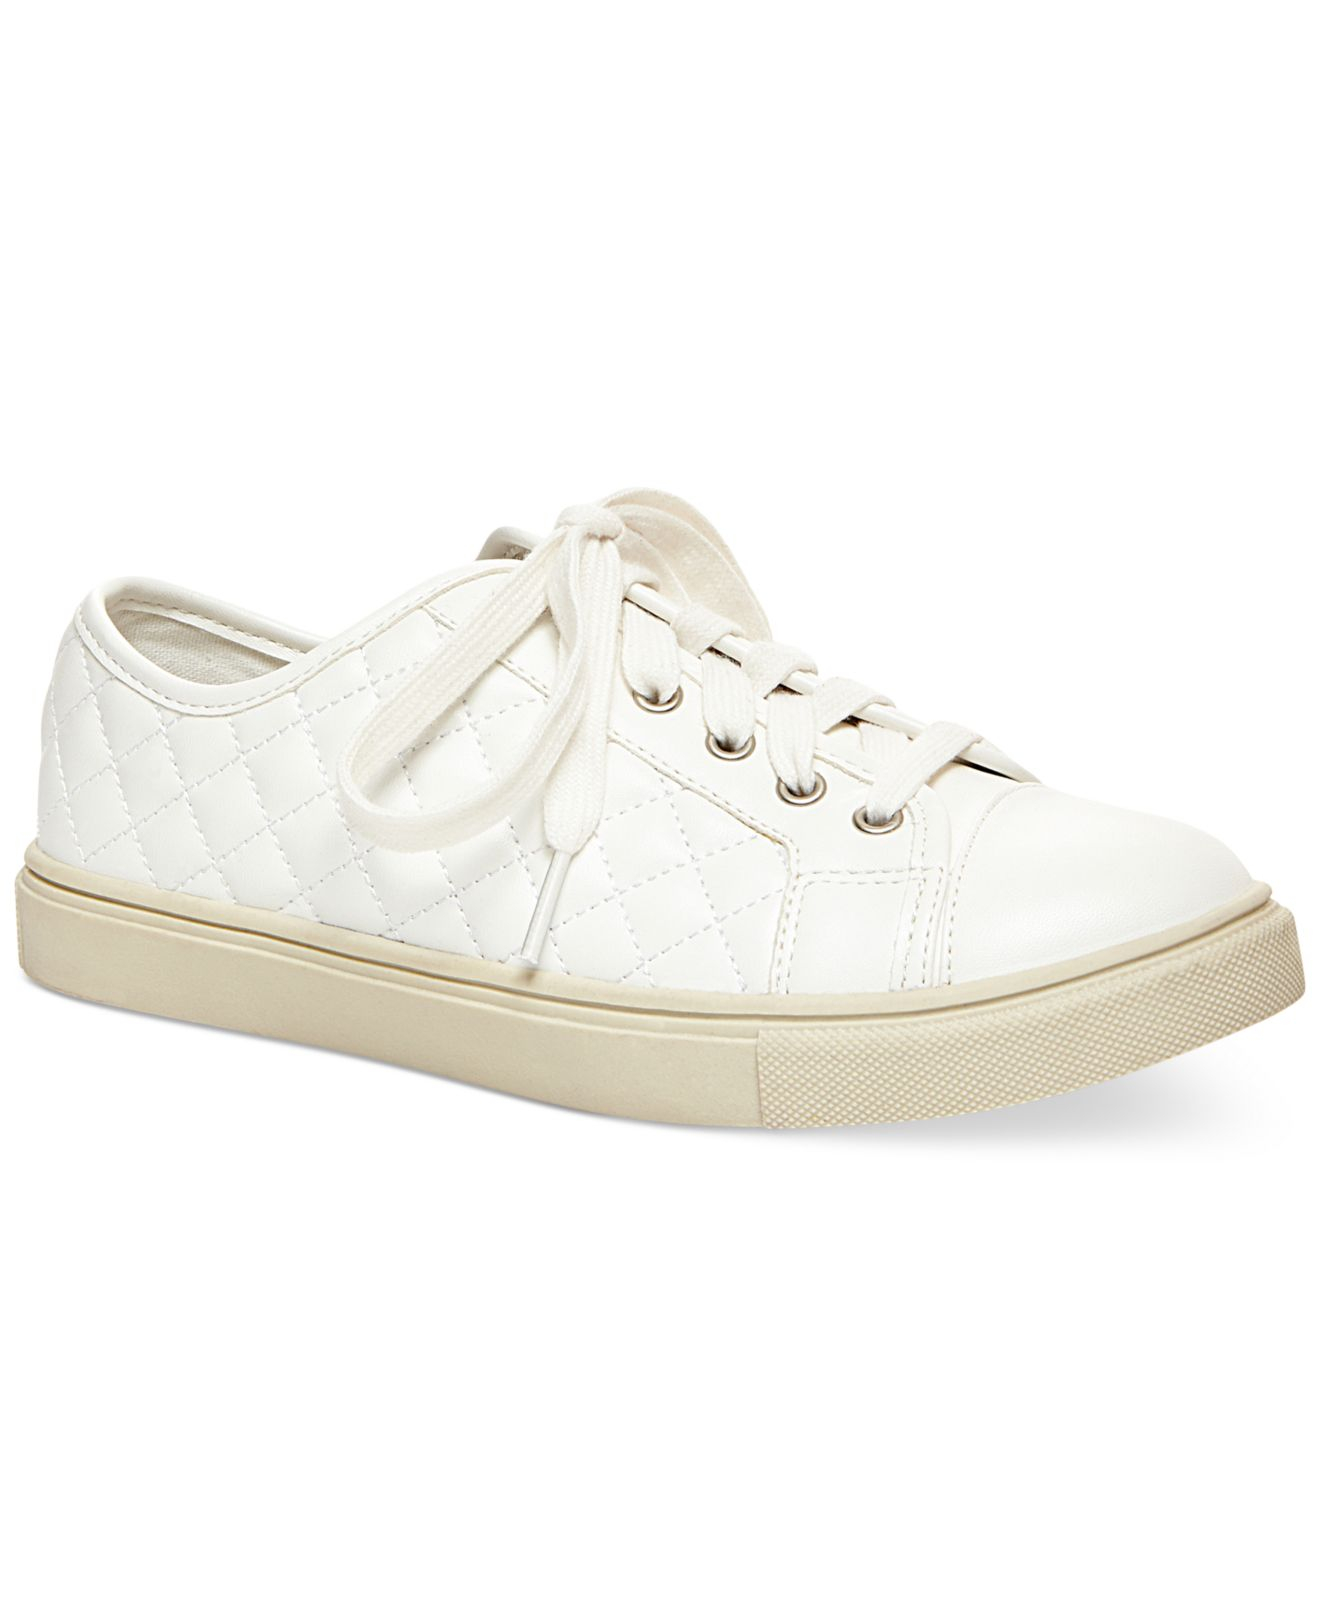 Madden girl Evette Quilted Sneakers in White | Lyst